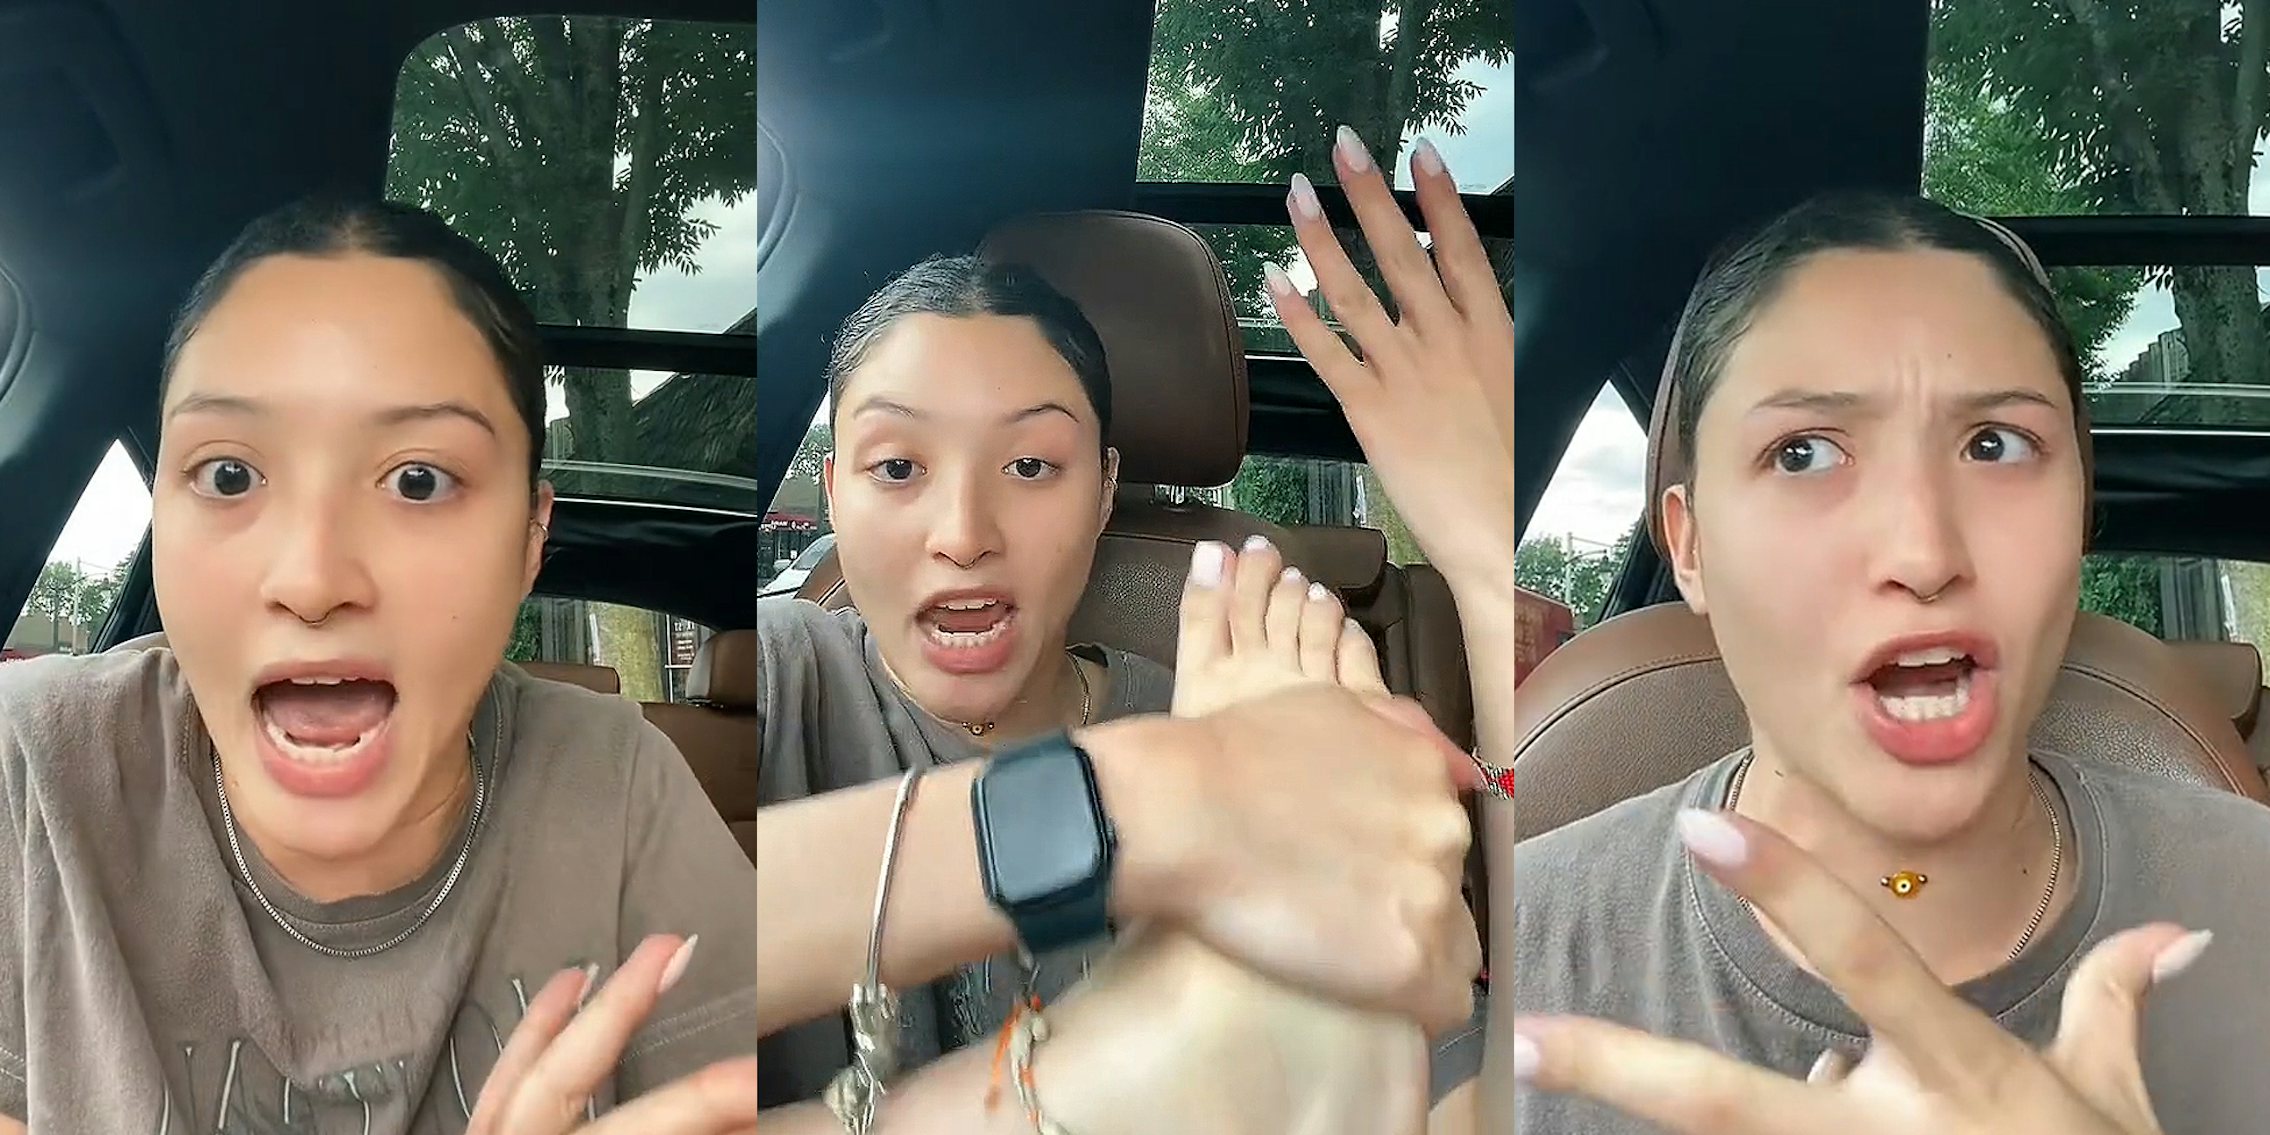 woman speaking in car hand up (l) woman speaking in car holding foot up showing toe and finger nails (c) woman speaking in car hand up (r)